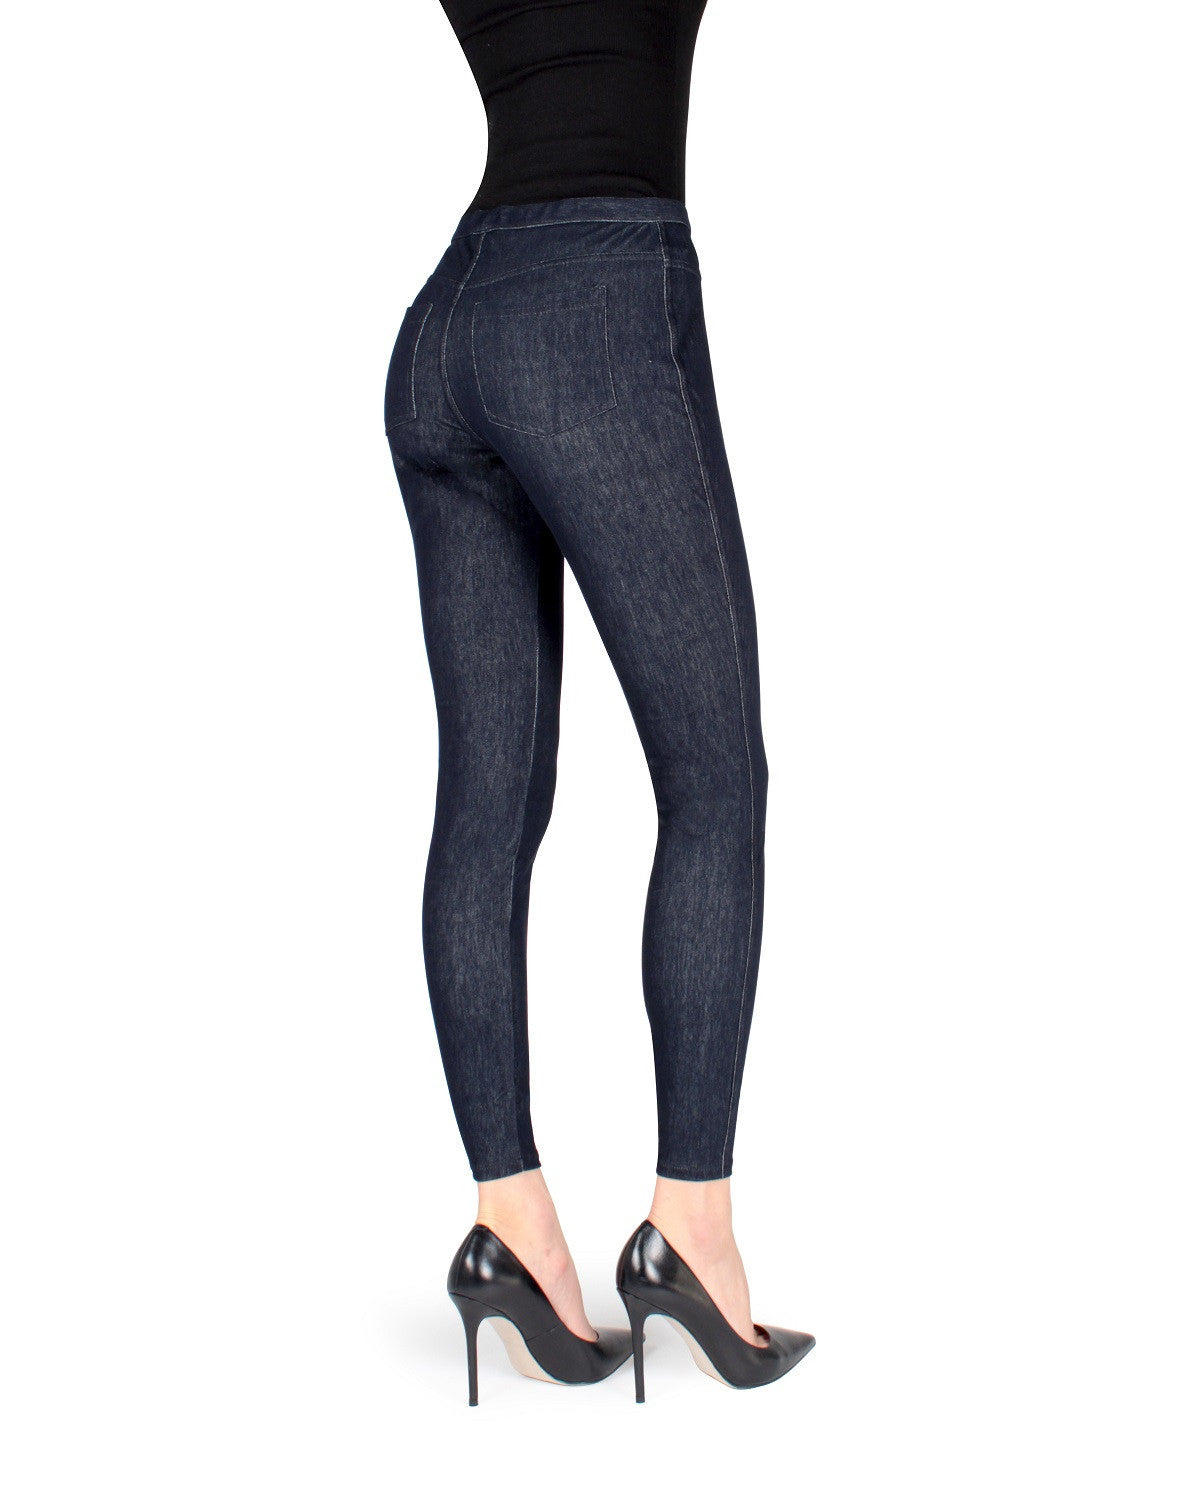 m. rena High Waisted Denim Leggings (One Size Fits Most) in Indigo